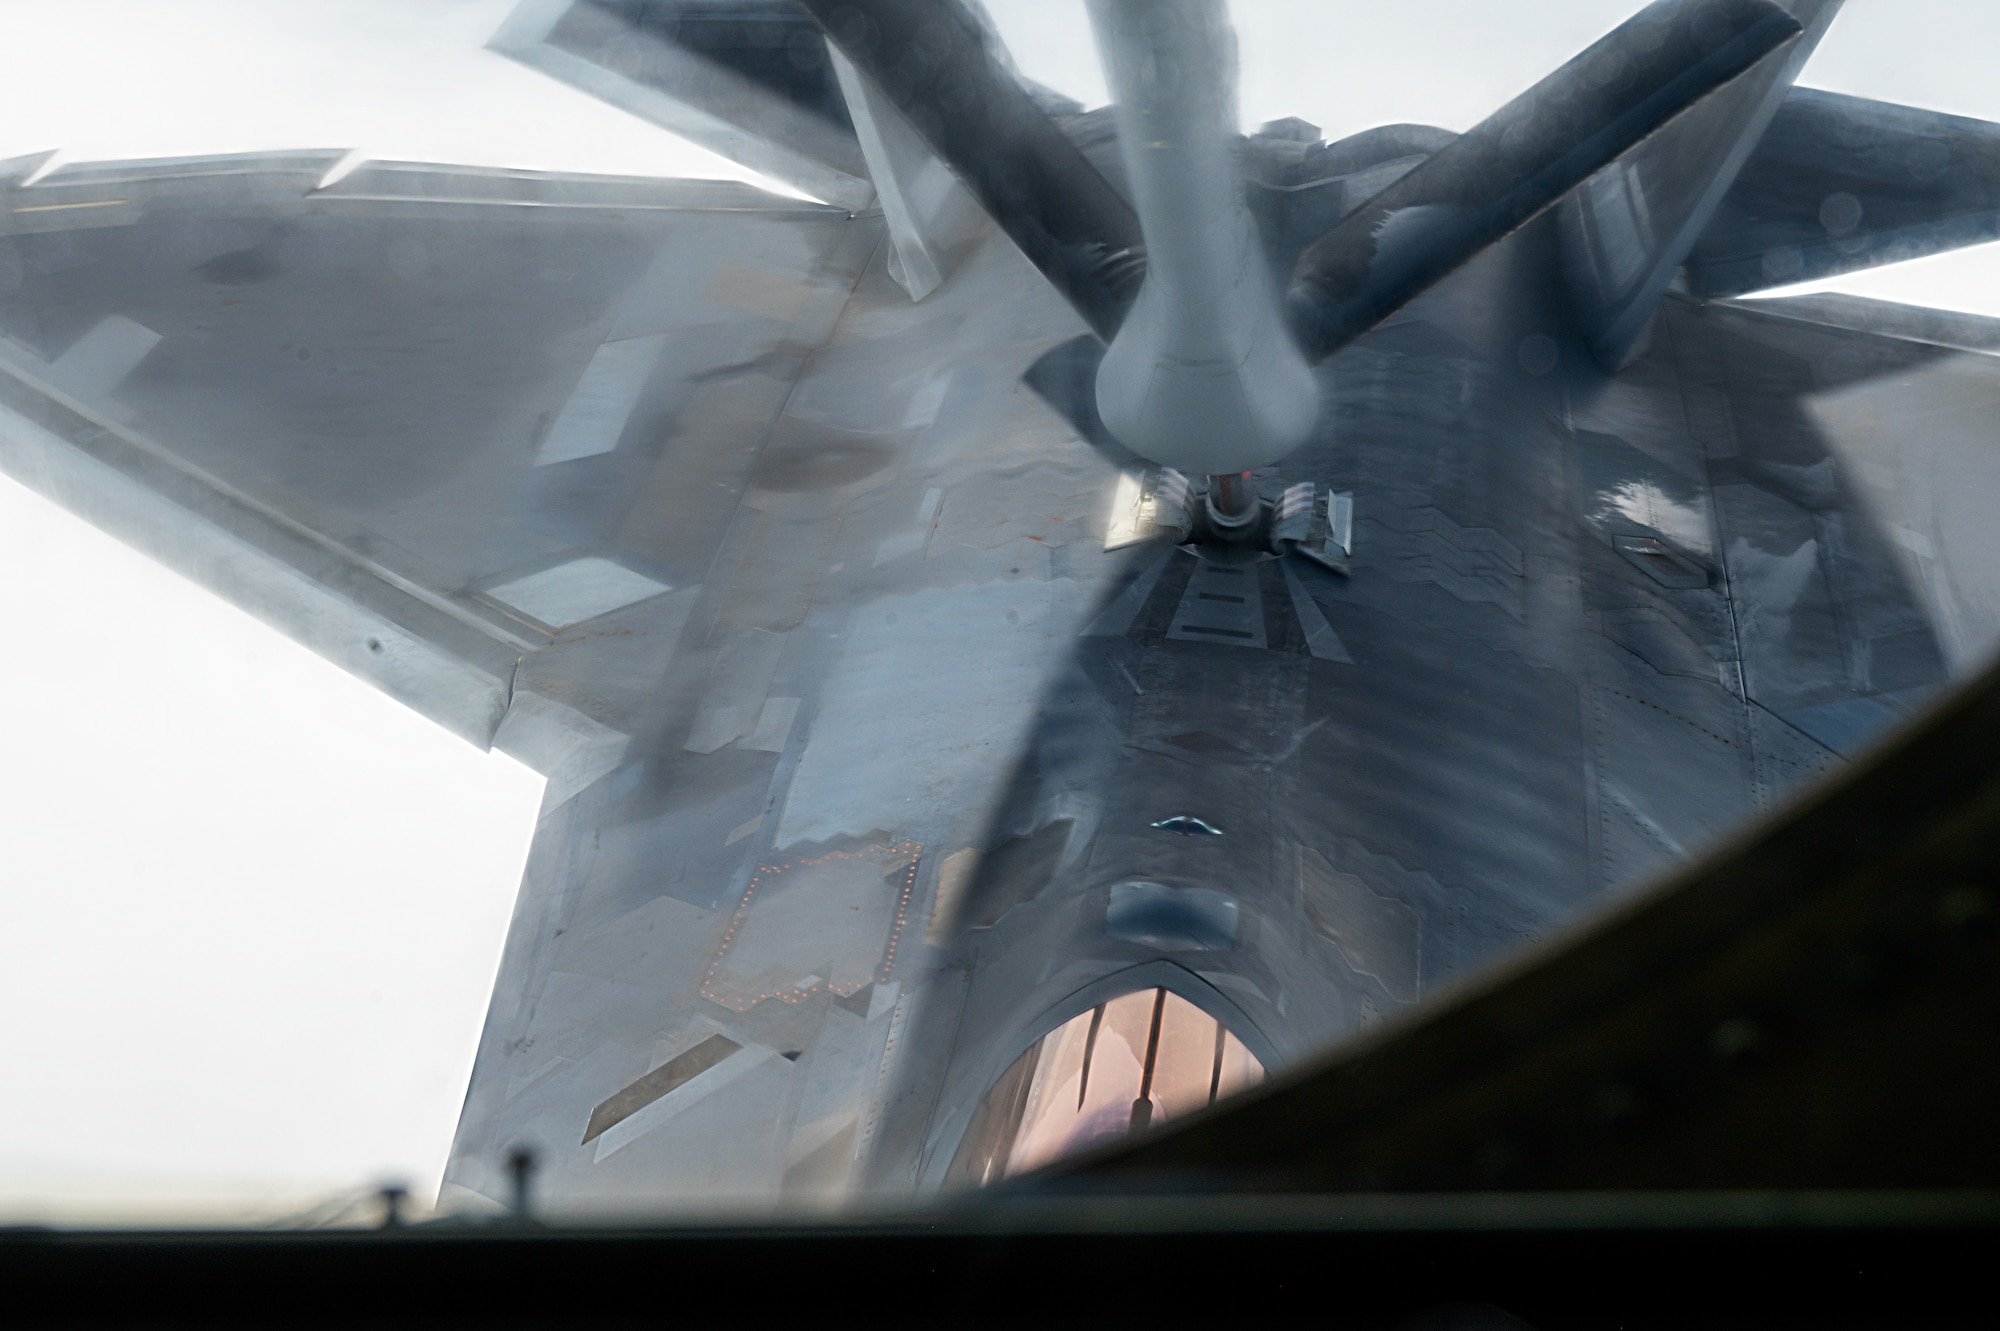 A U.S. Air Force F-22 Raptor receives fuel from a KC-135 Stratotanker assigned to Fairchild Air Force Base, over Alaska, during a Phase 3 Lead Wing exercise, June 6th, 2023. The 92nd Air Refueling Wing deployed personnel and KC-135 Stratotankers, to execute a Phase 3 Lead Wing exercise in preparation to be lead tanker wing at Air Mobility Command’s capstone exercise, Mobility Guardian 2023.